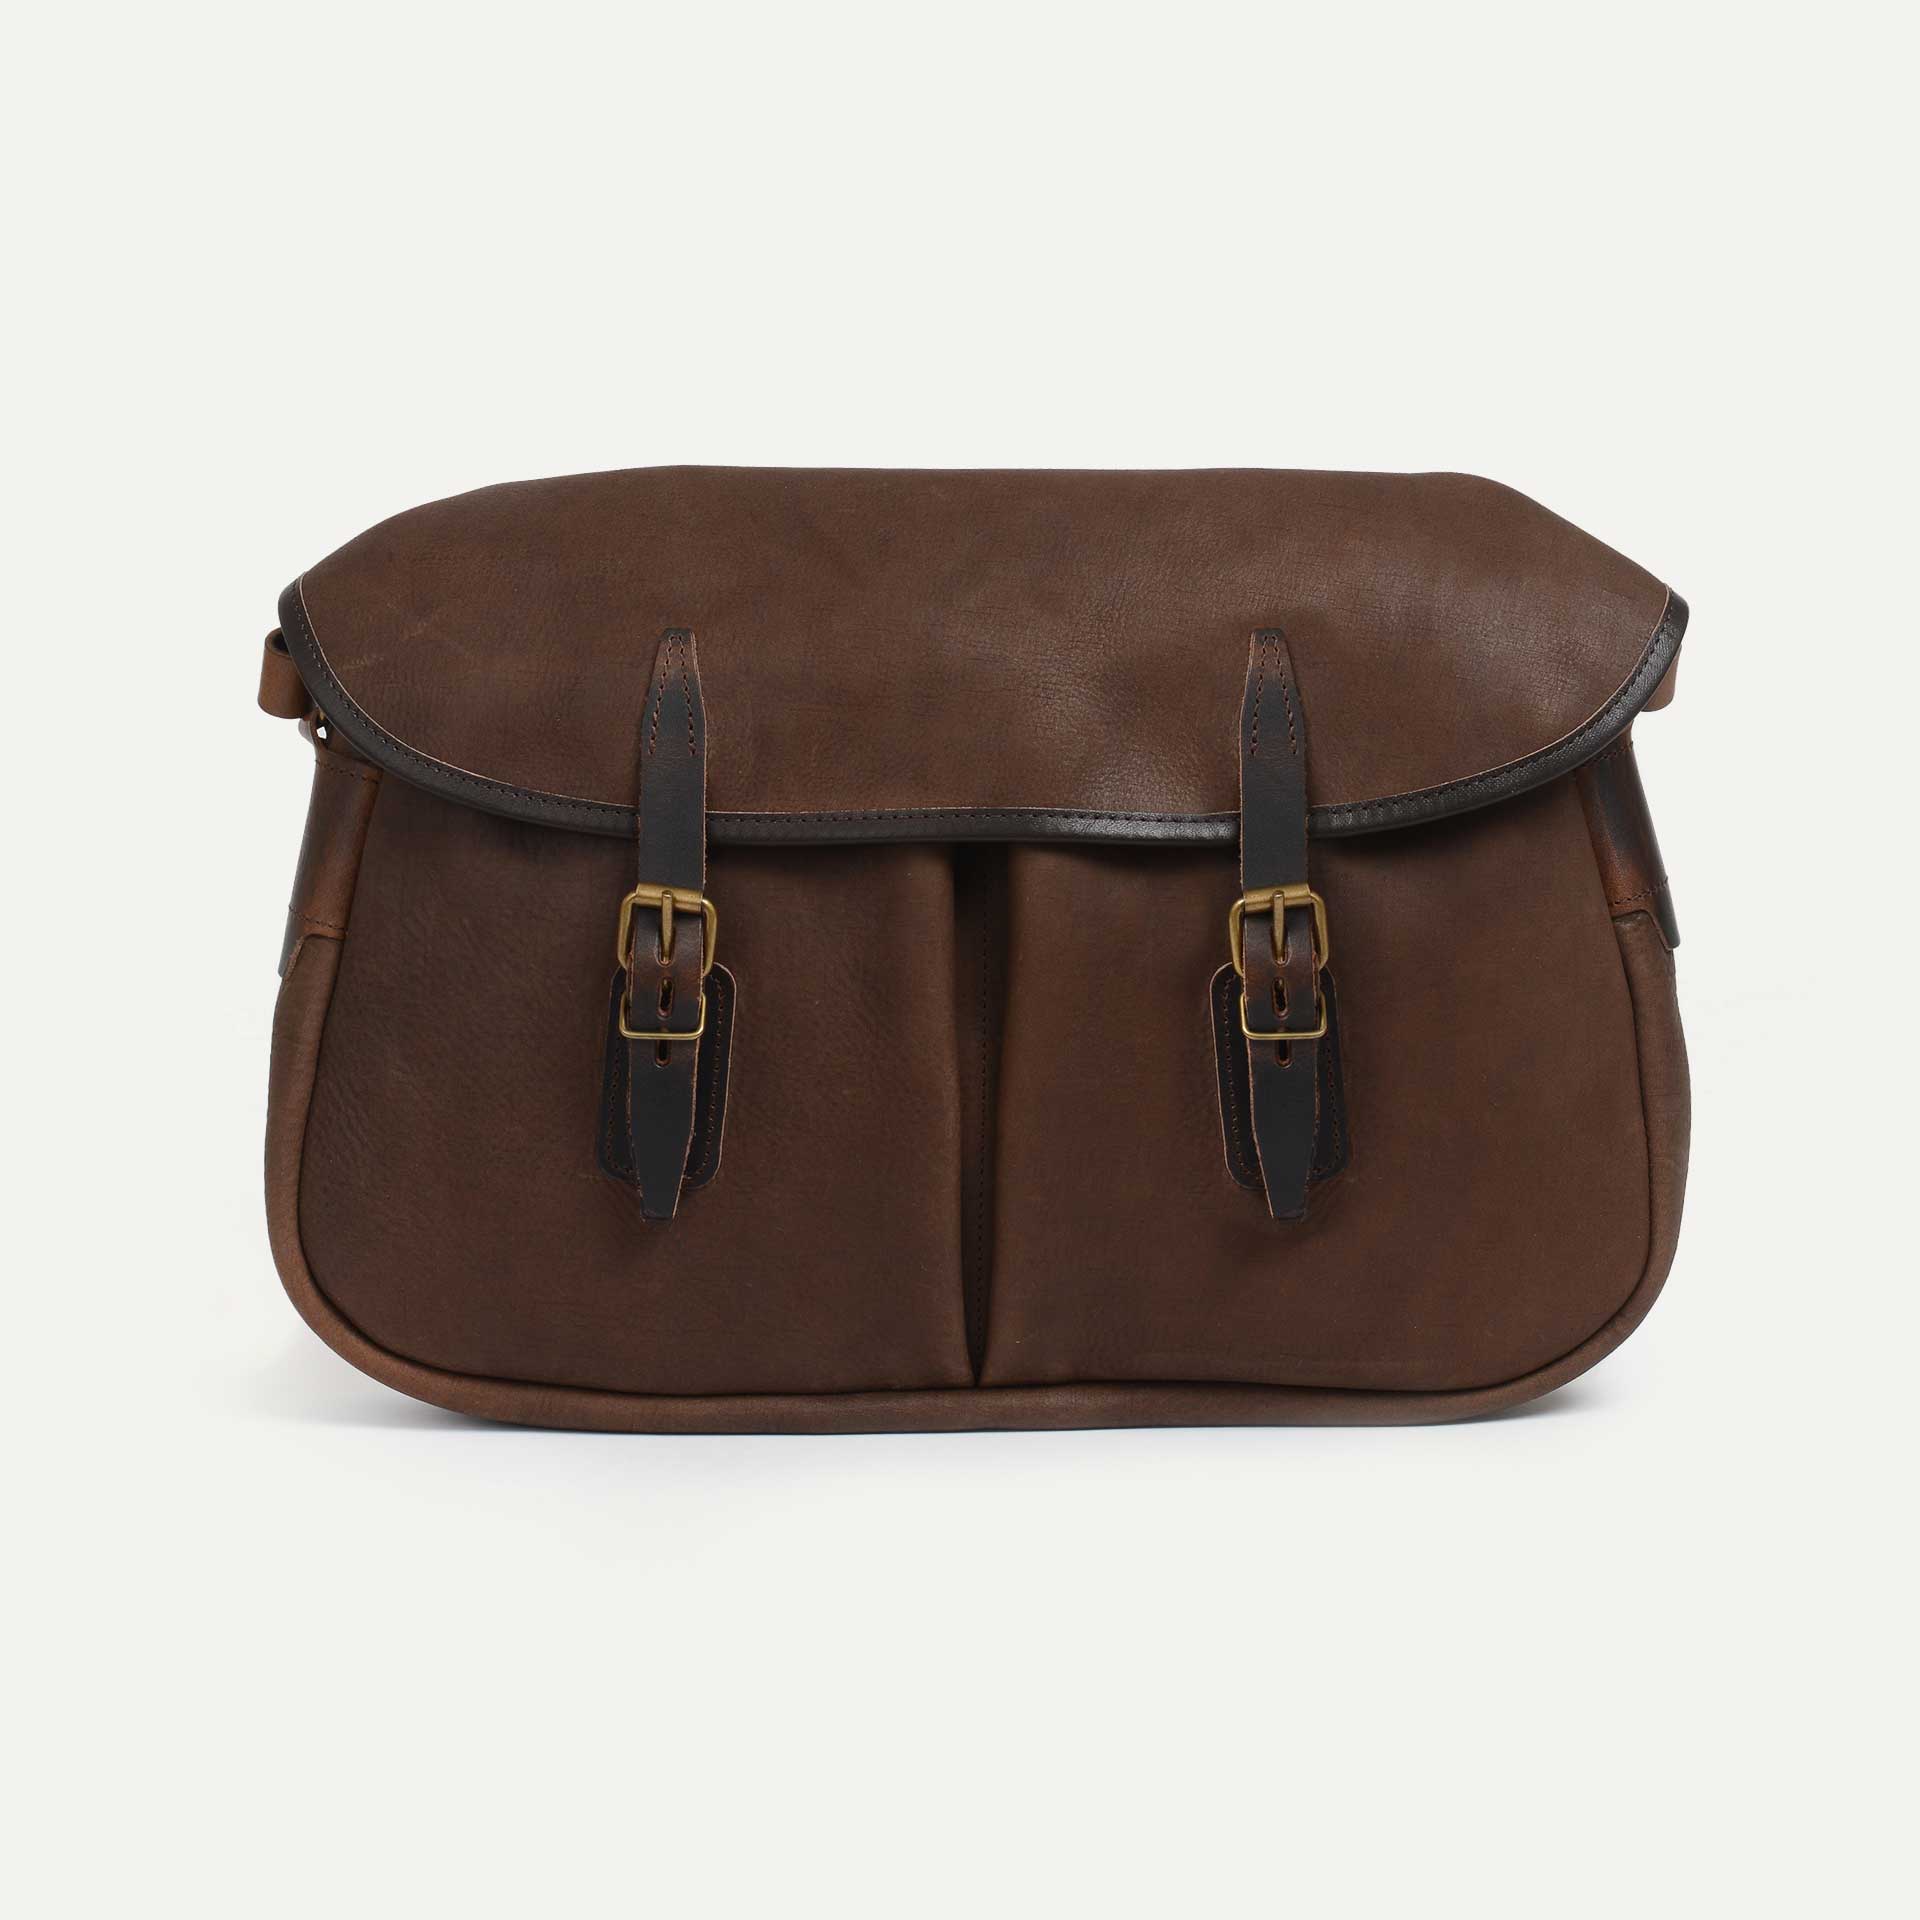 Waxed leather musette bag